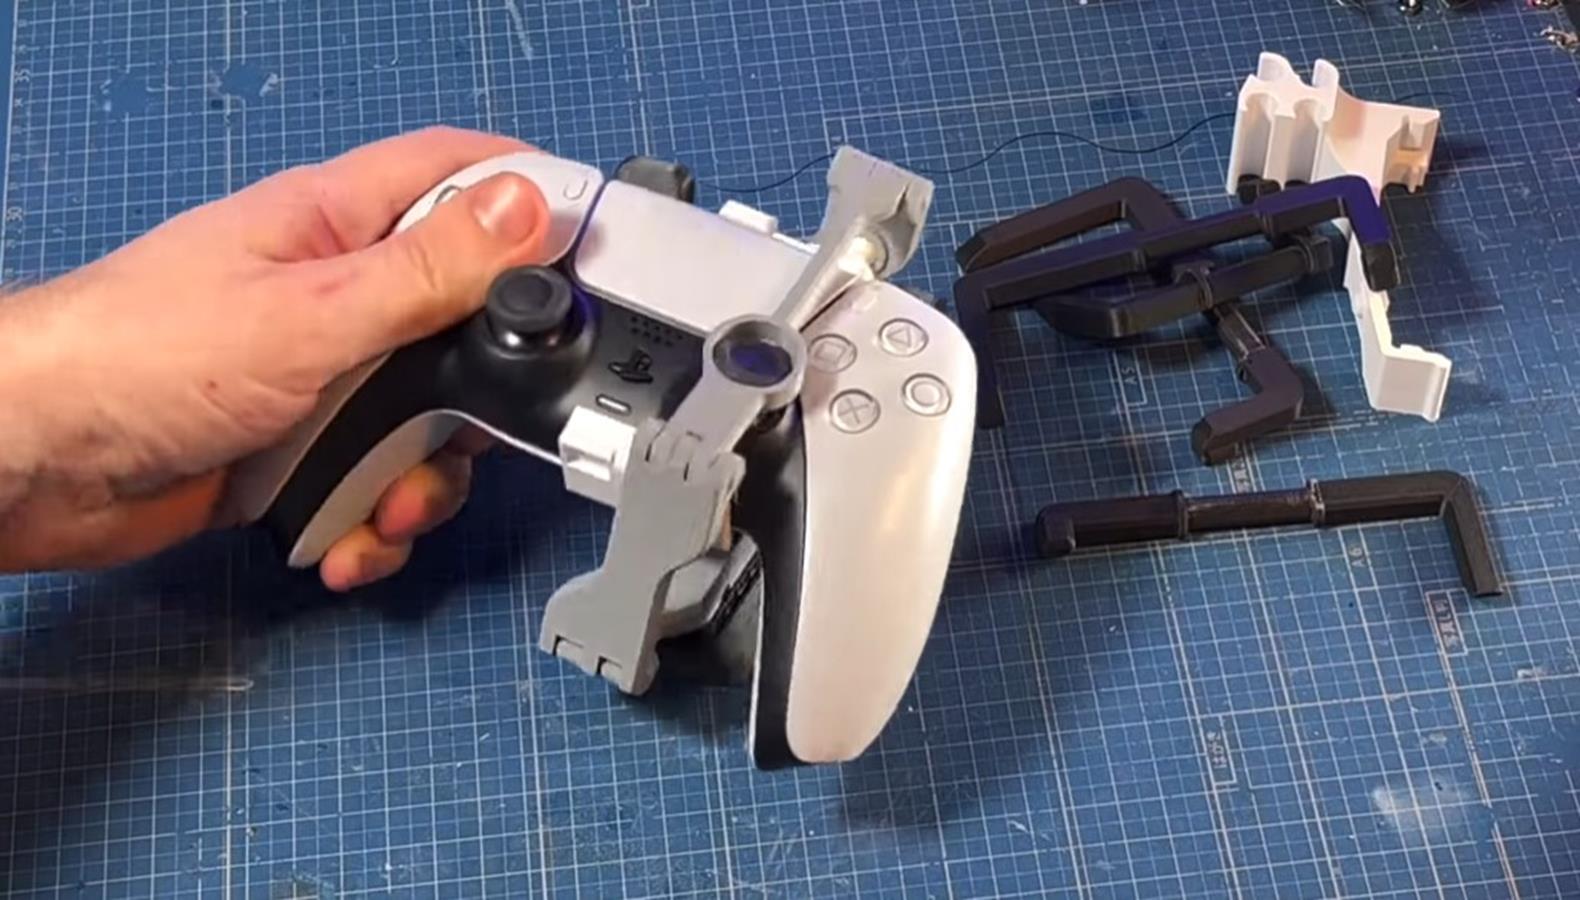 One-handed DualSense operation.  A unique gadget for the PlayStation 5 controller has been created